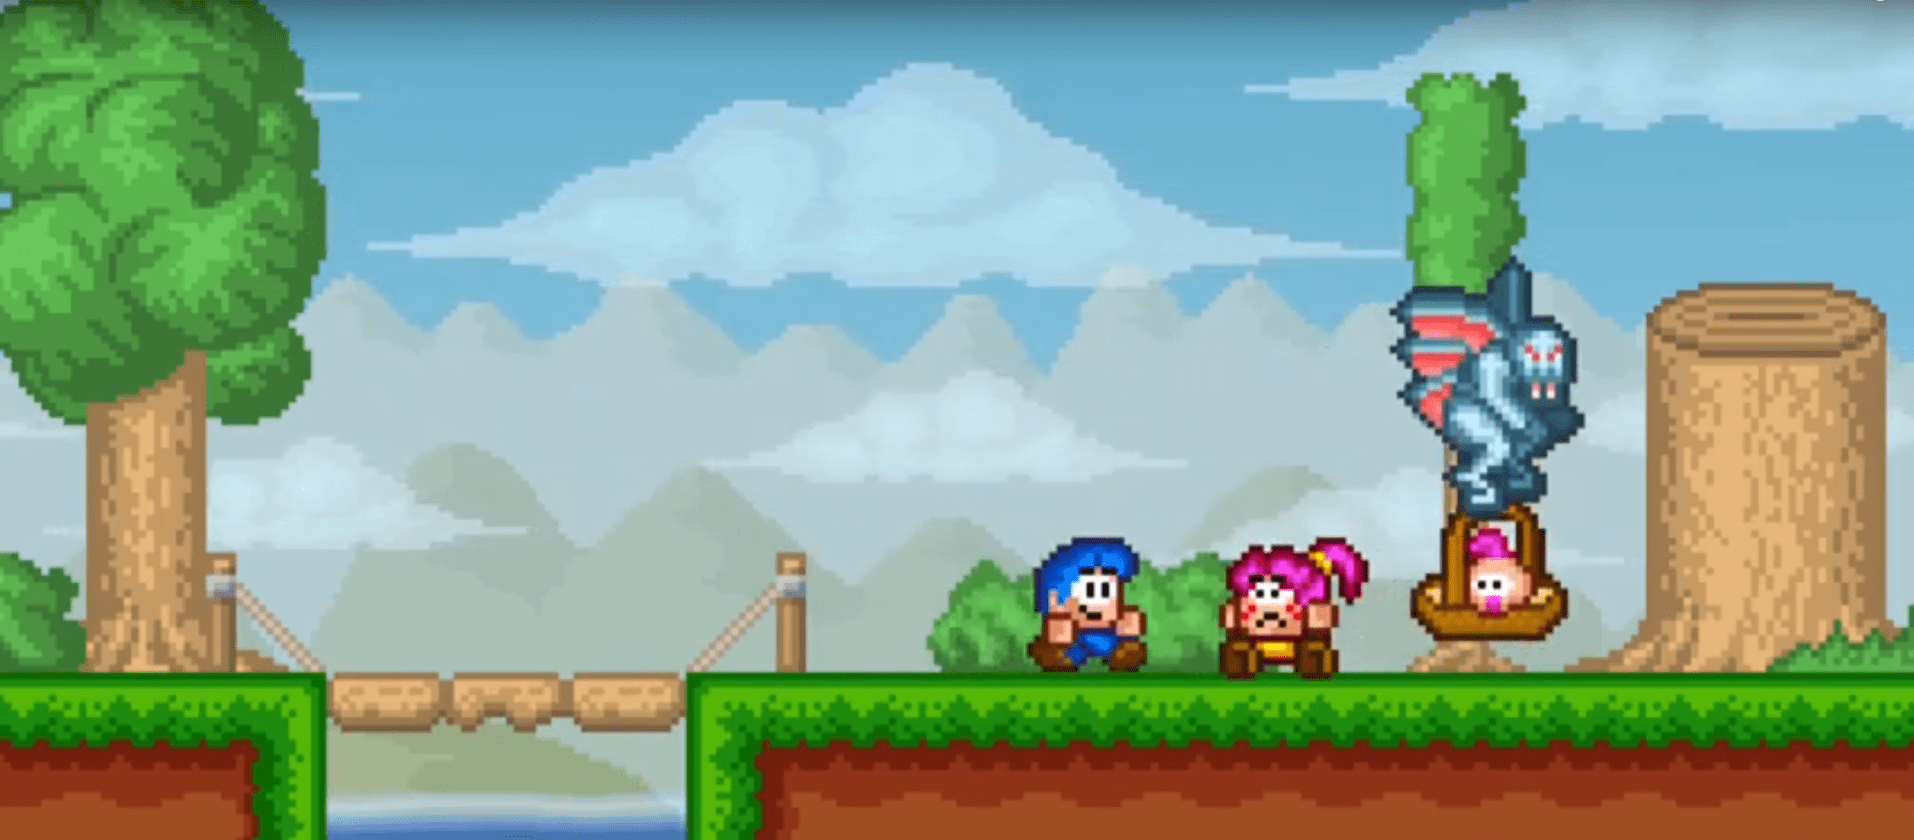 Bloo Kid 2 Is A Retro 2D Platformer Coming To The Nintendo Switch This Month